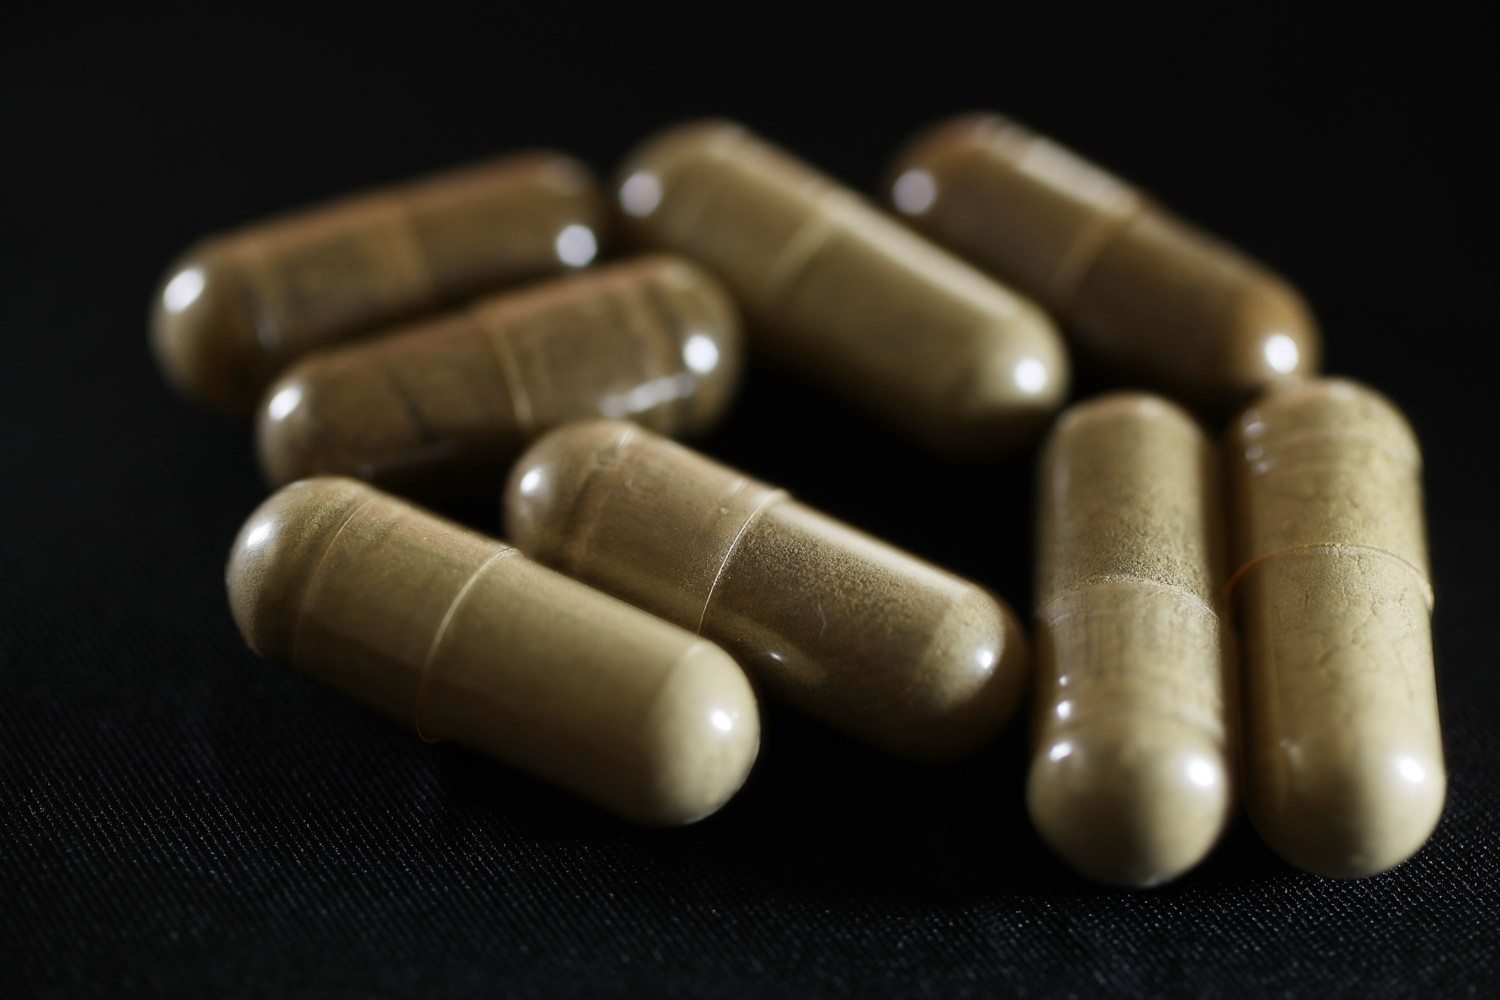 Florida Struggles With Legal Herbal Supplement Which Mirrors Opiate Narcotic Effects